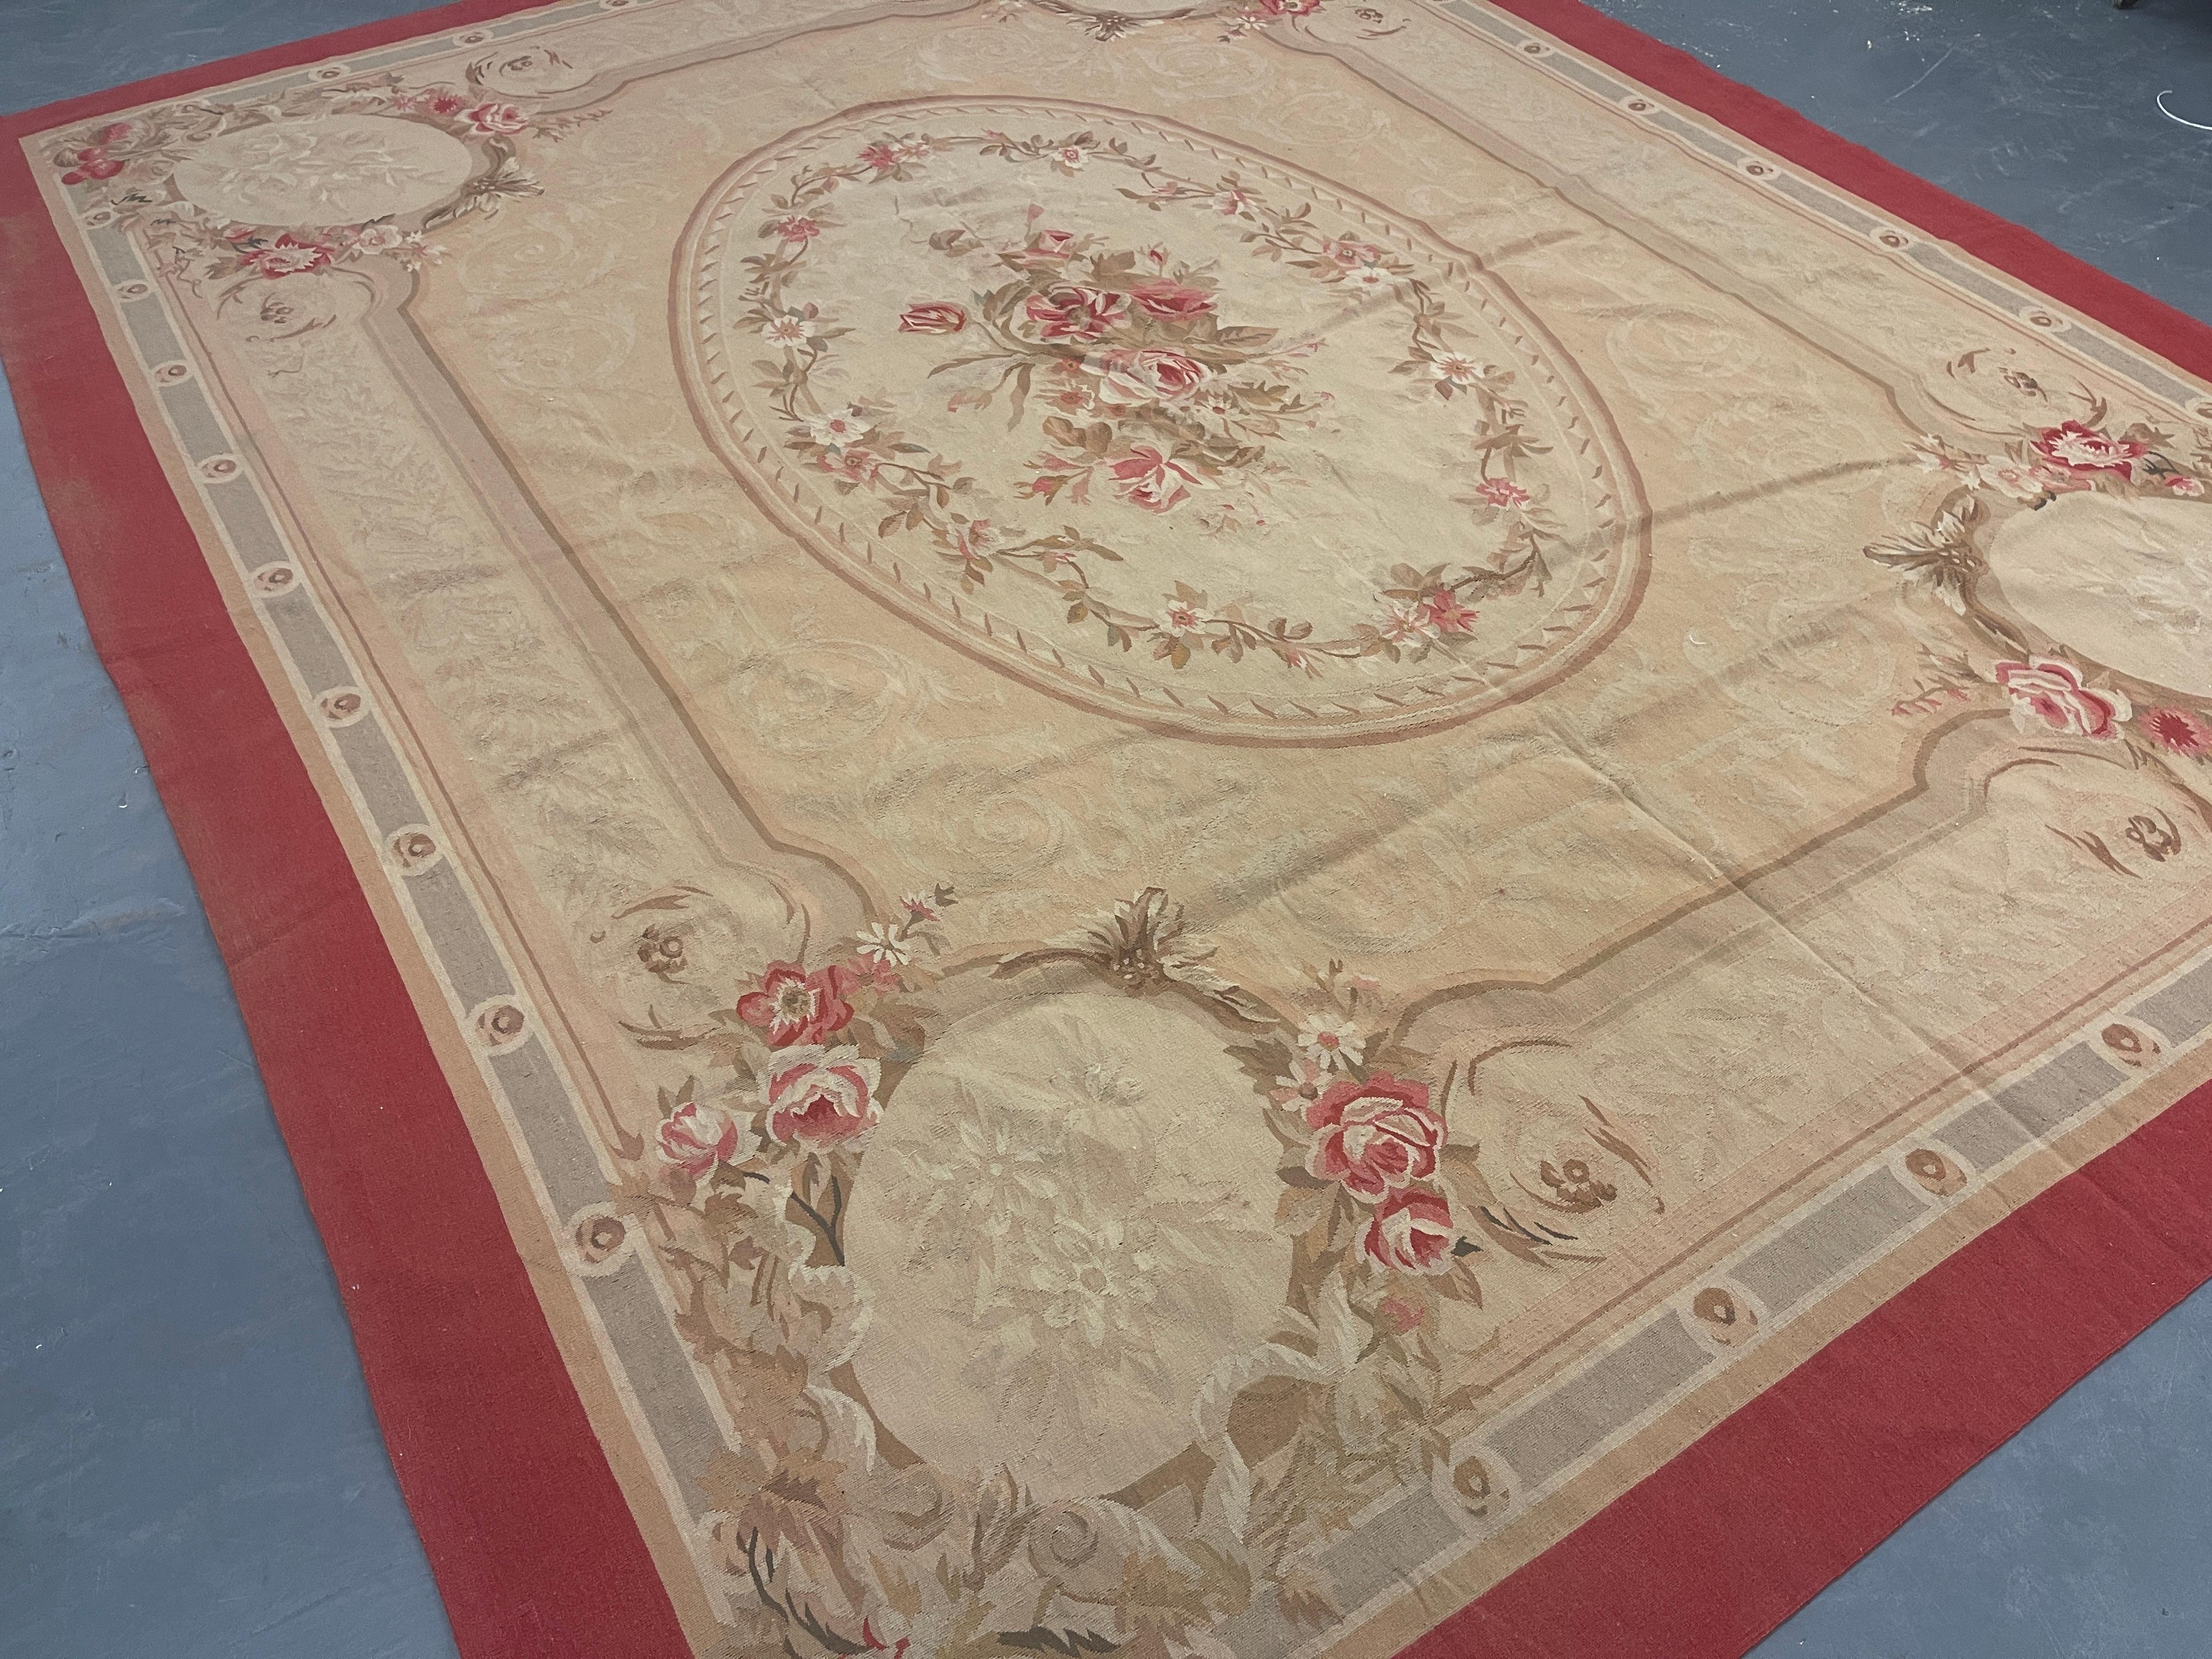 This fantastic area rug has been handwoven with a beautiful symmetrical floral design woven on an ivory blue background with Beige, red, cream green and ivory accents. This elegant piece's colour and design make it the perfect accent rug.
This style